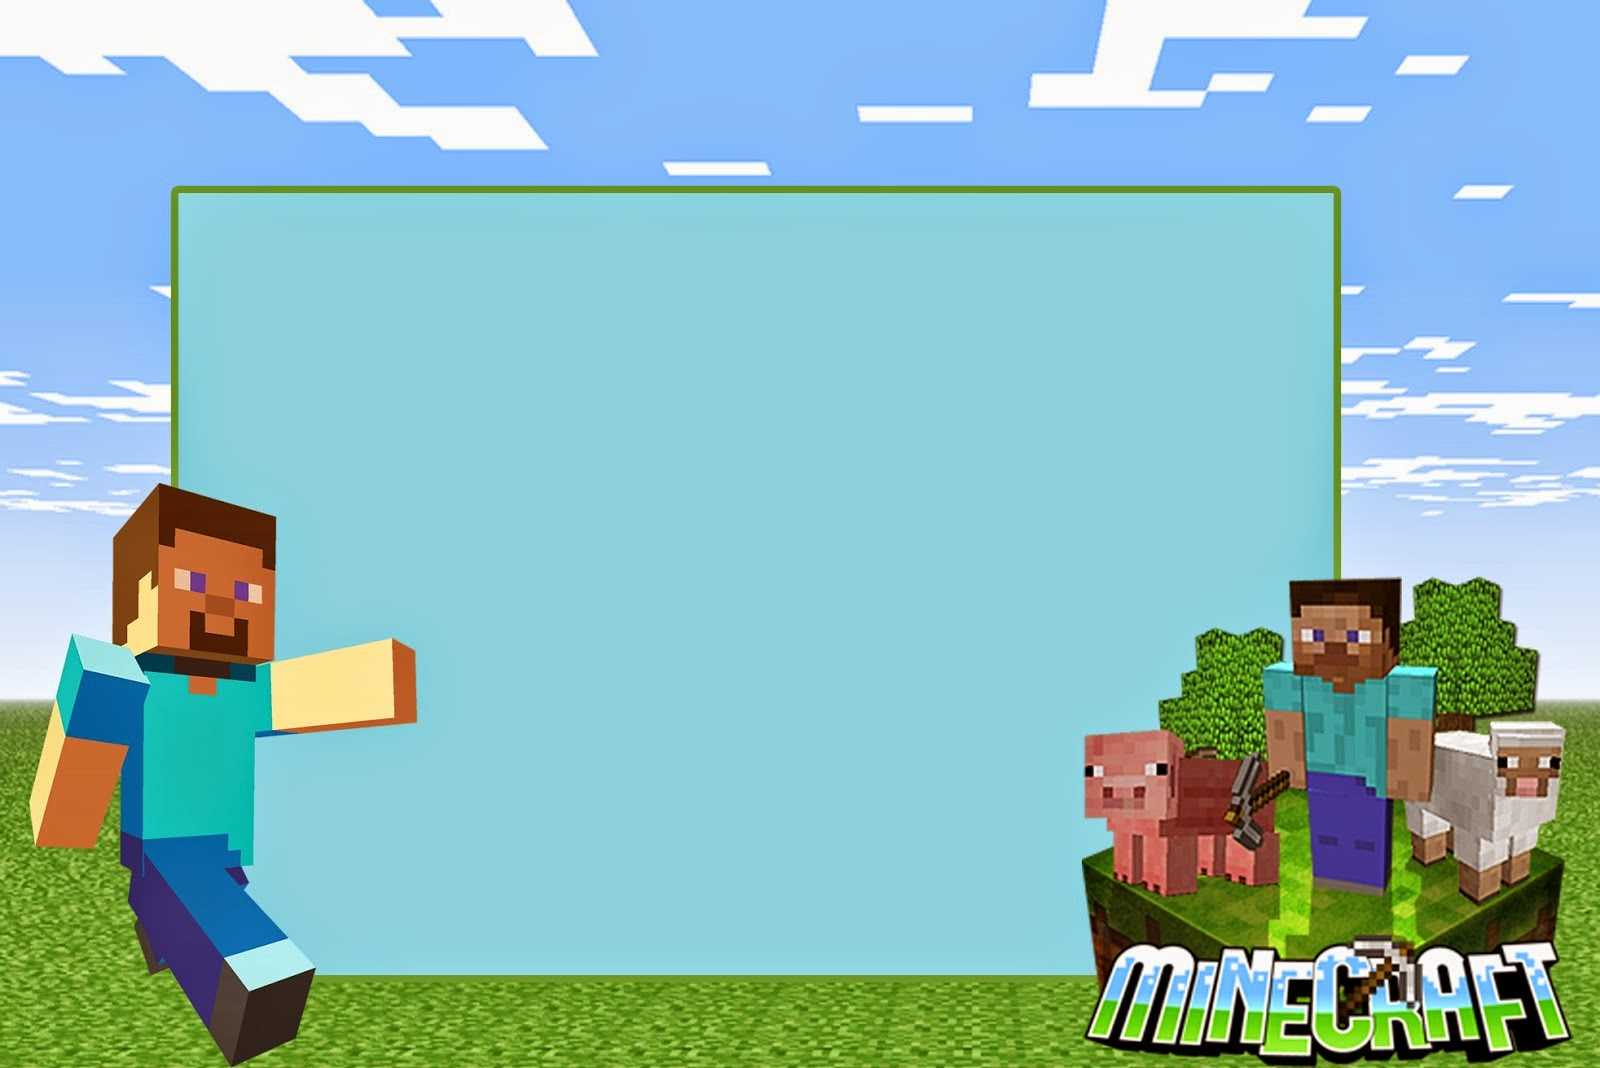 Minecraft: Free Printable Invitations. – Oh My Fiesta! In Throughout Minecraft Birthday Card Template